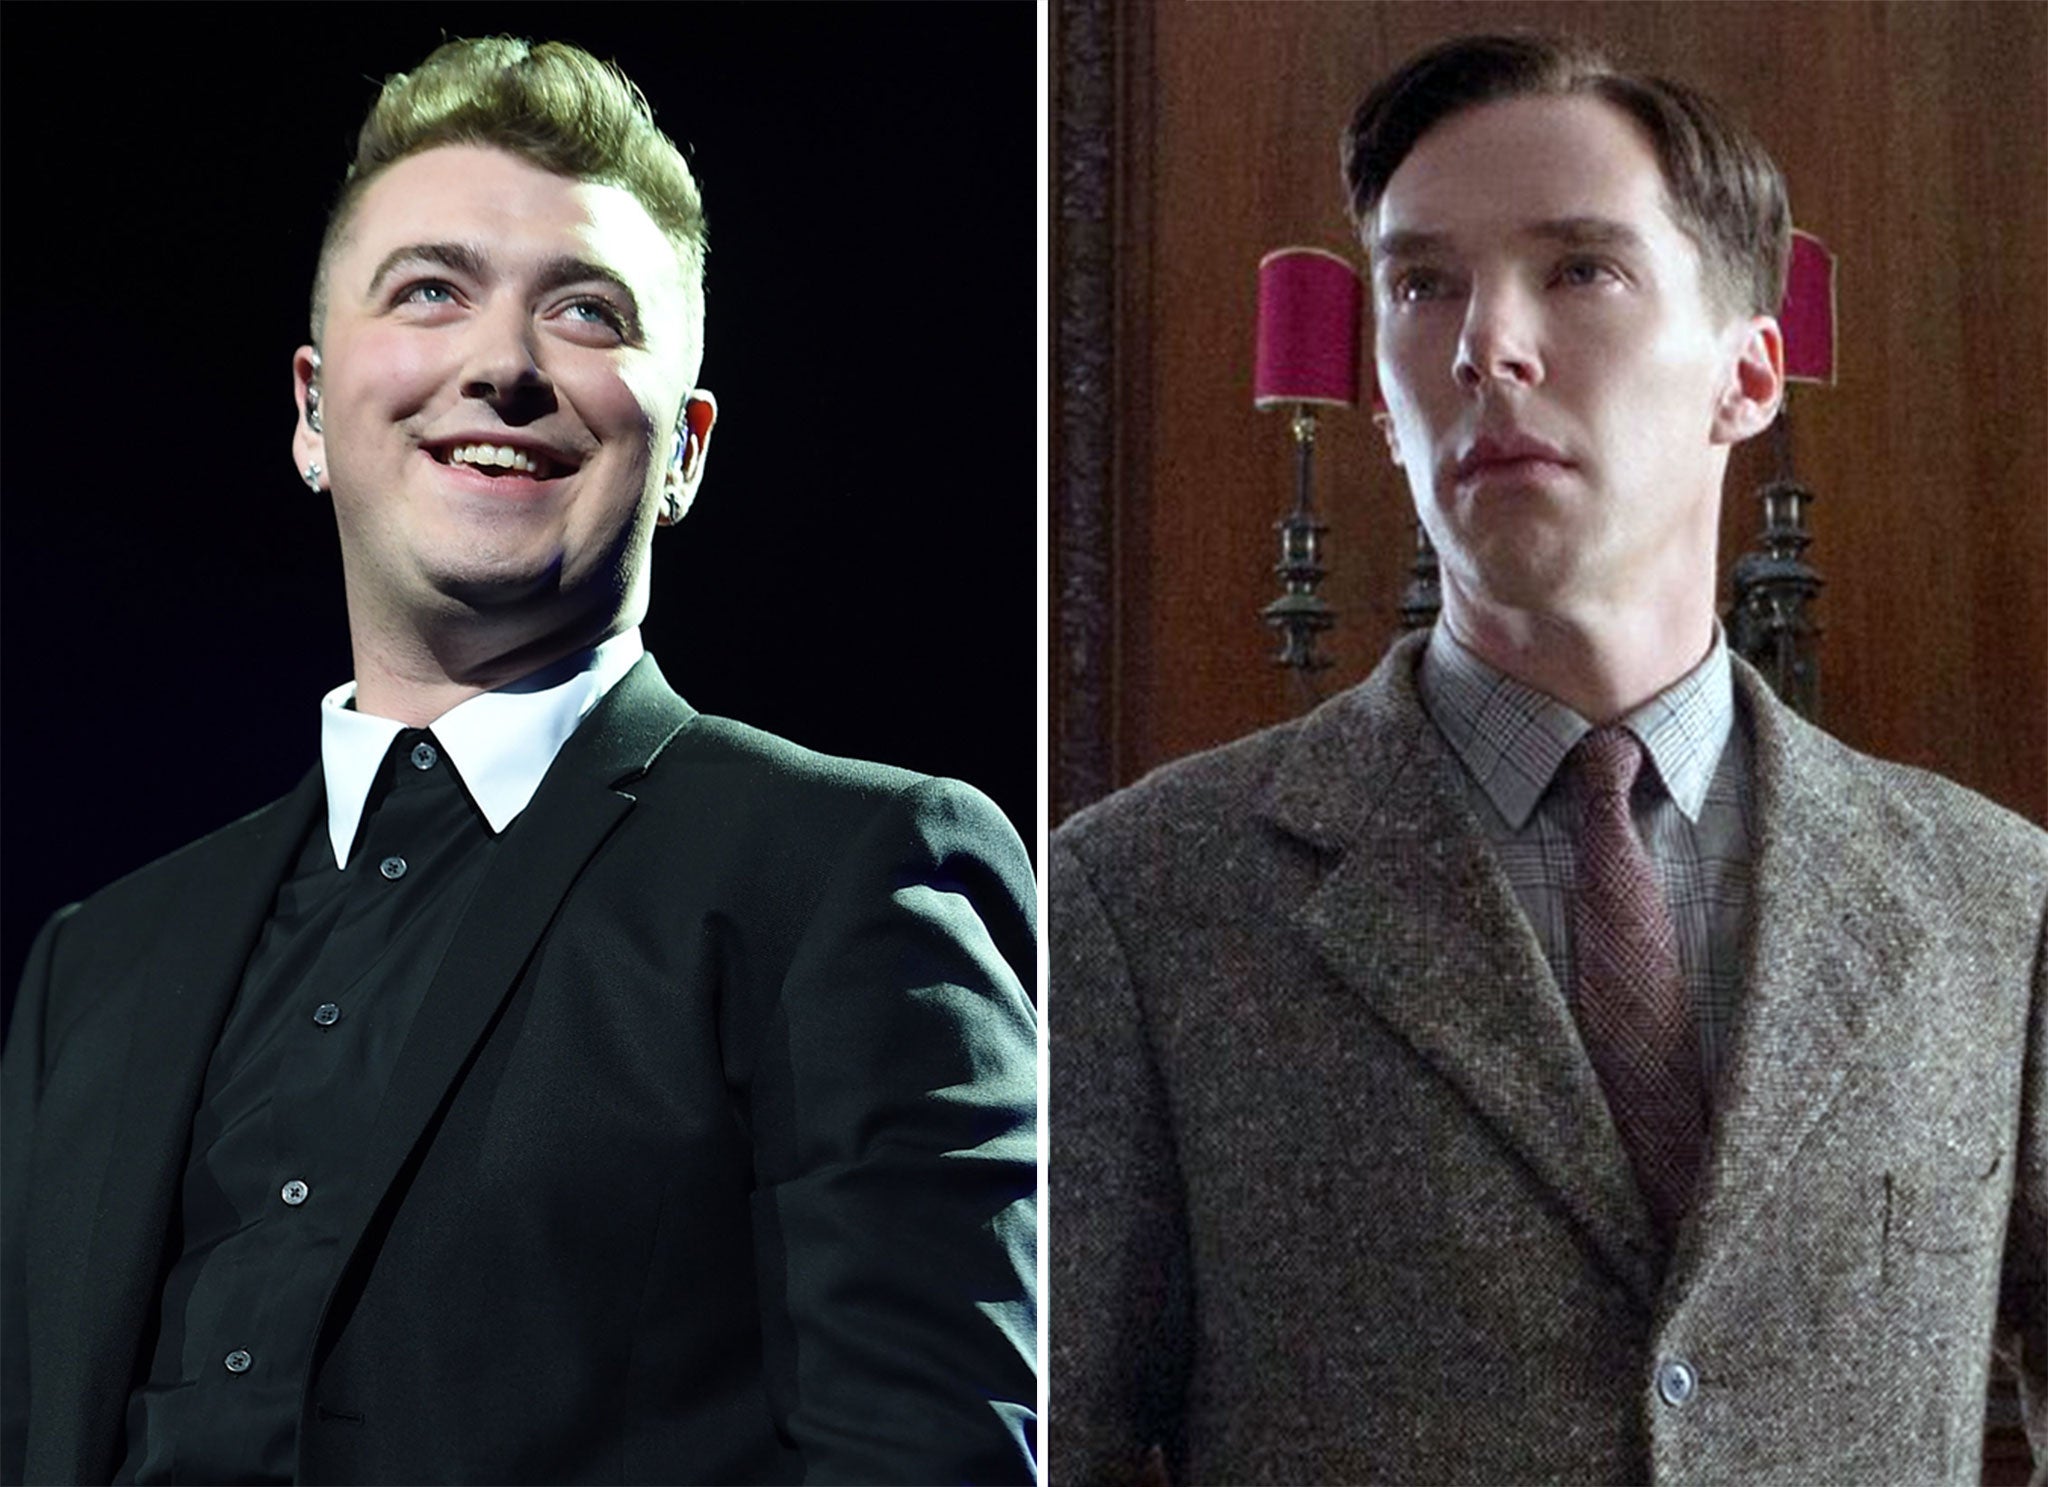 Sam Smith and Benedict Cumberbatch's The Imitation Game are nominated for GLAAD Awards